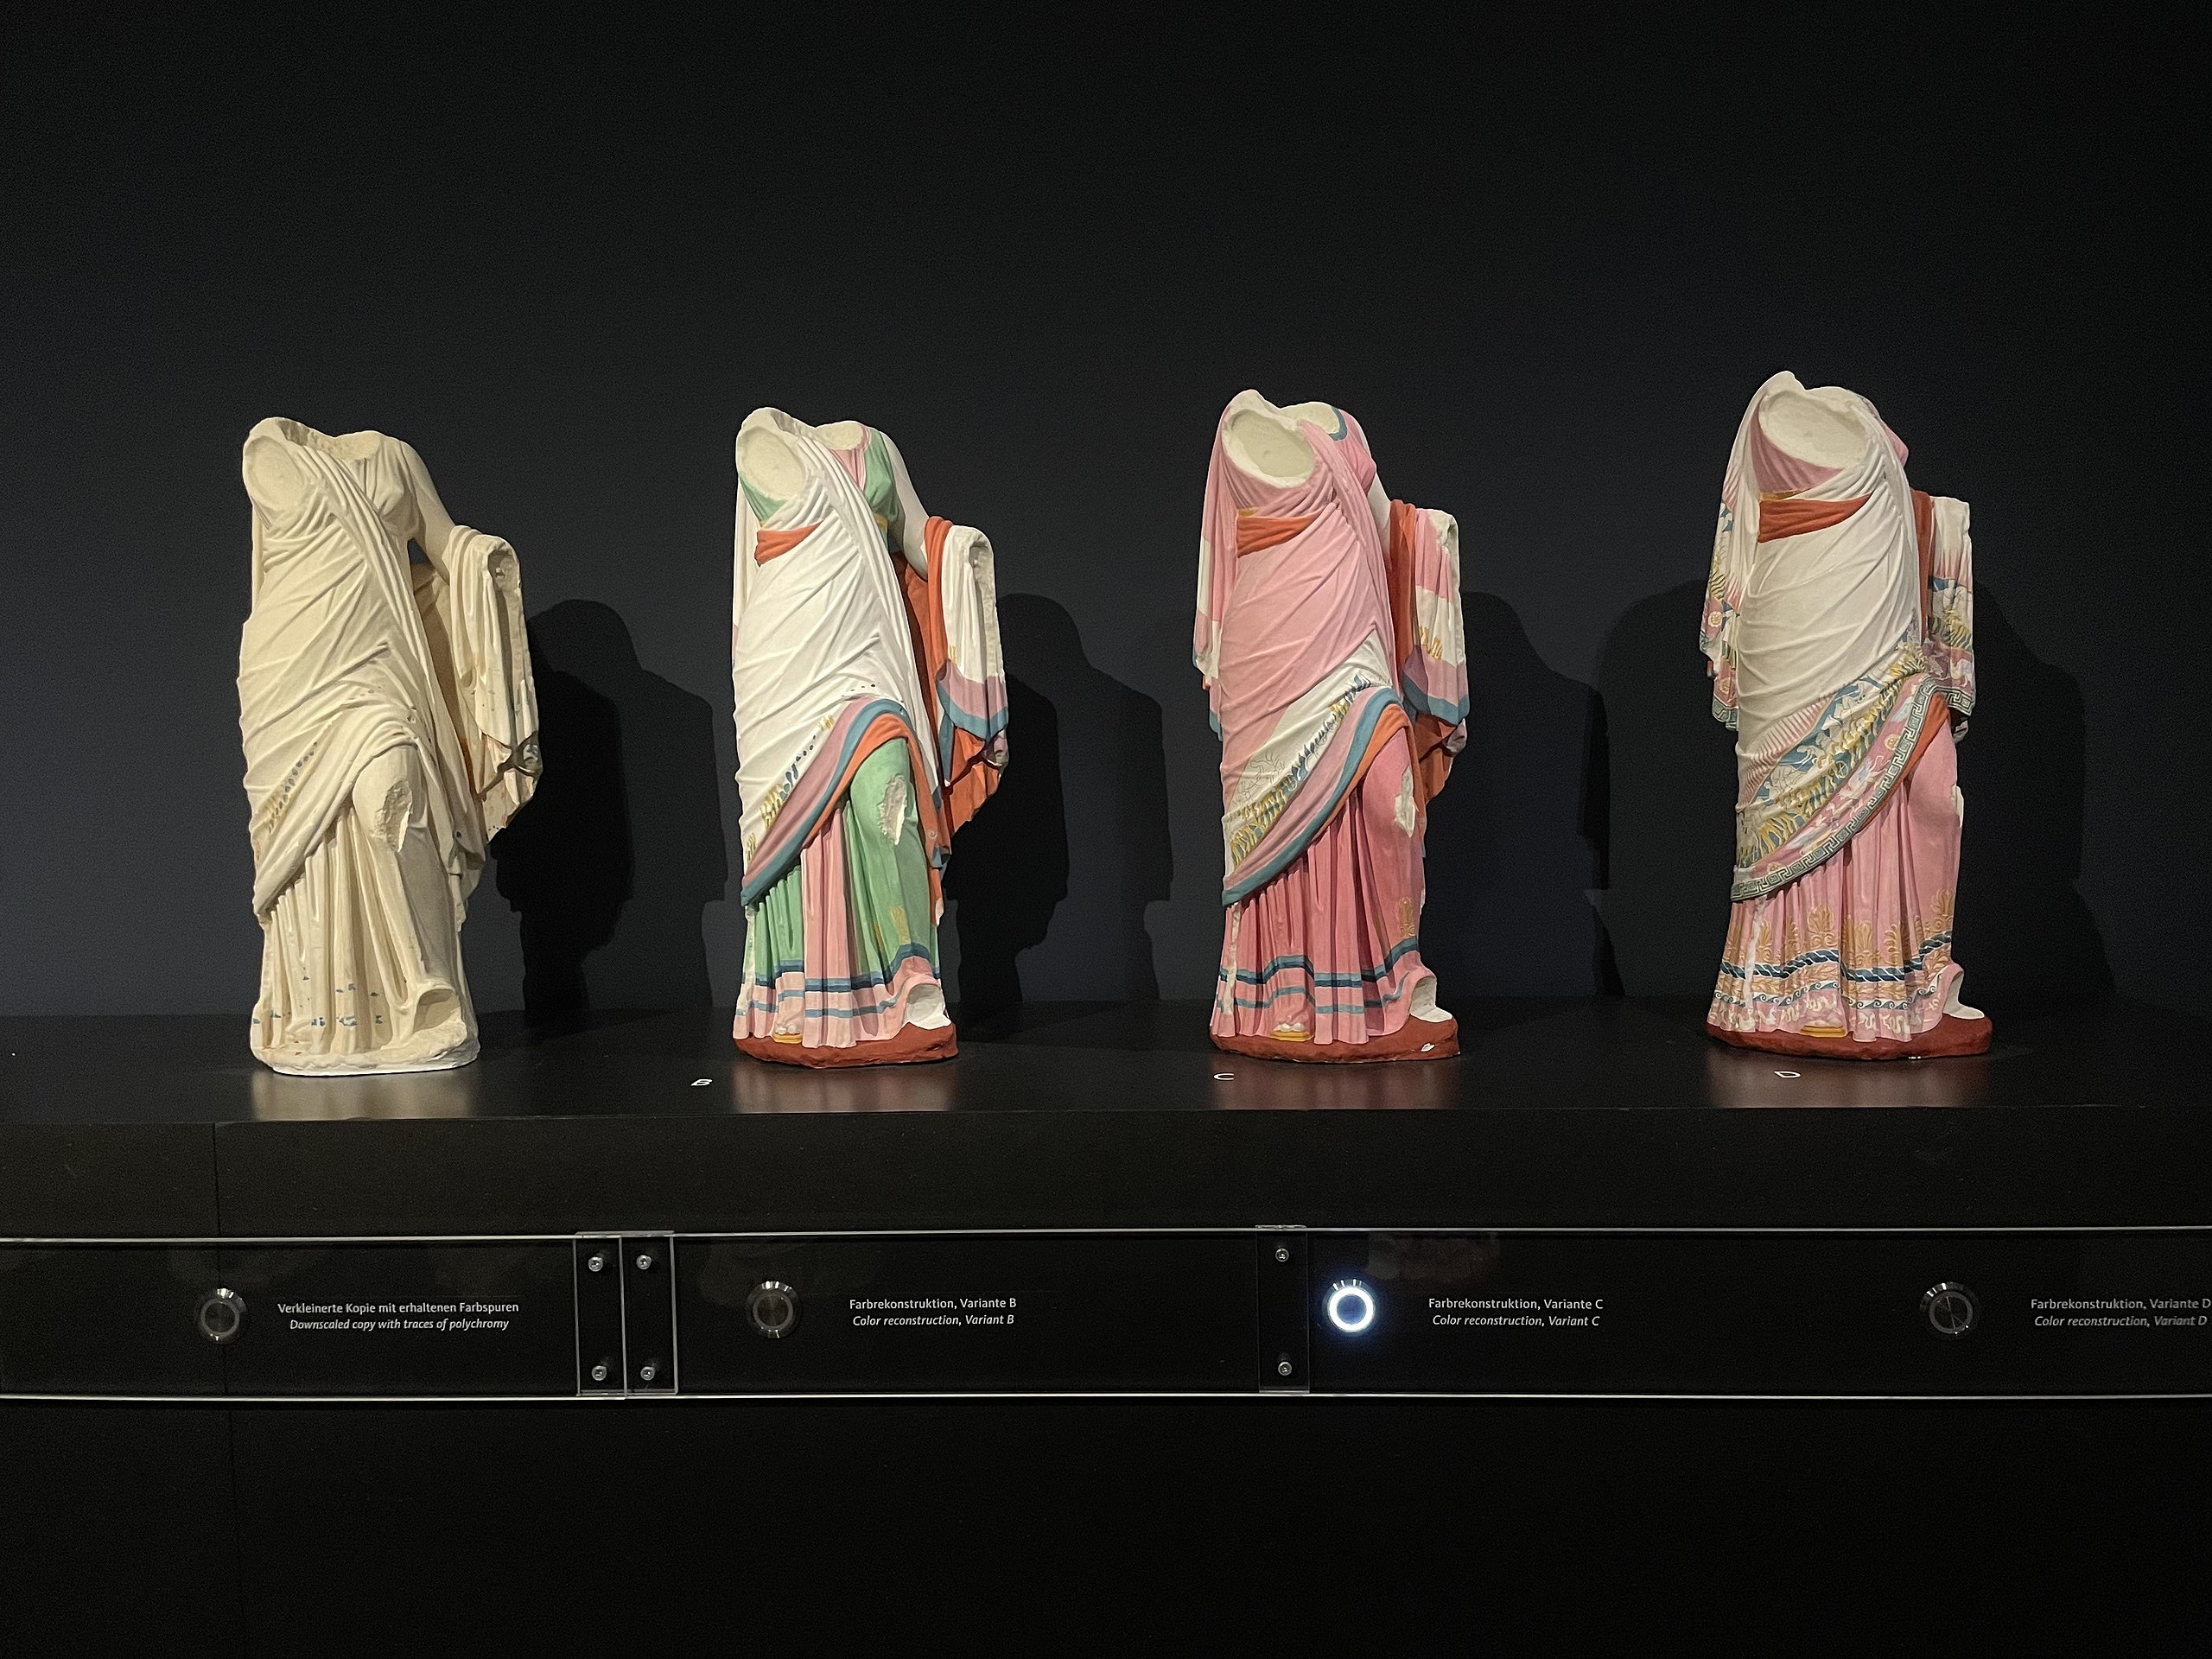 Four Greek statues of a woman in a sari on display.